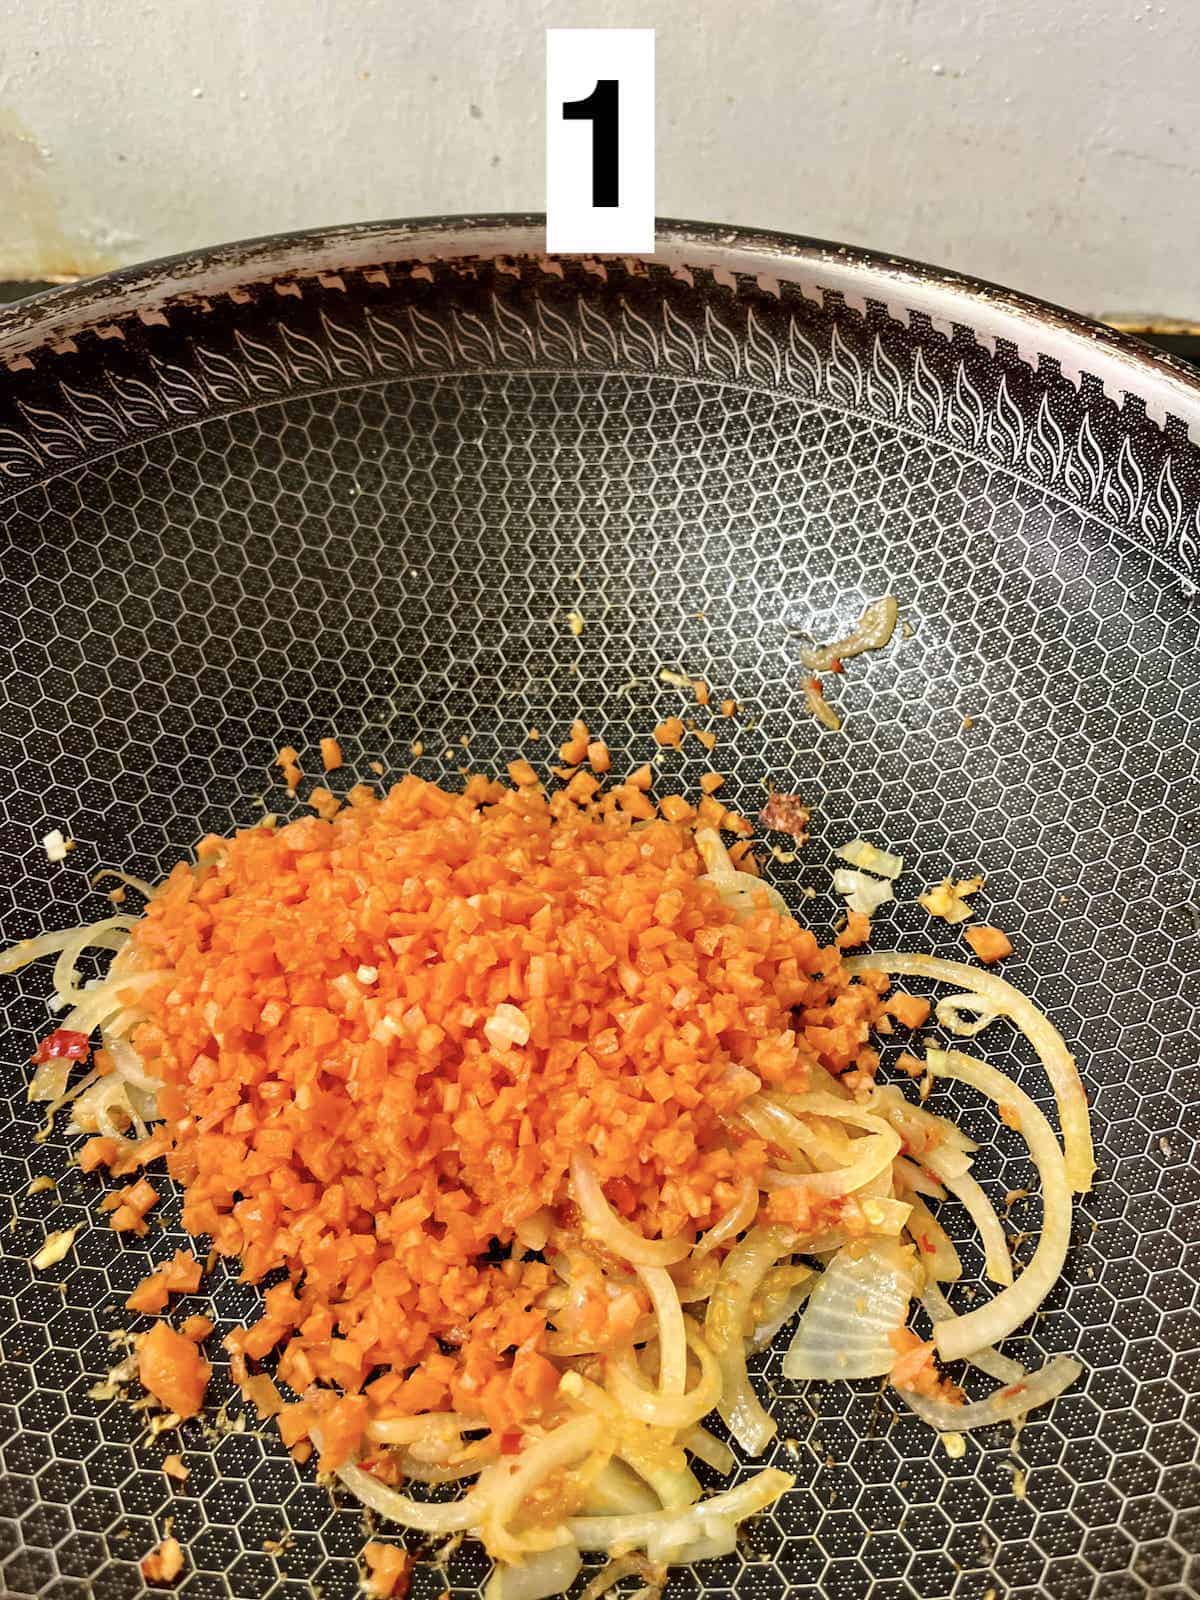 Stir-frying onions and diced carrots in a large wok.